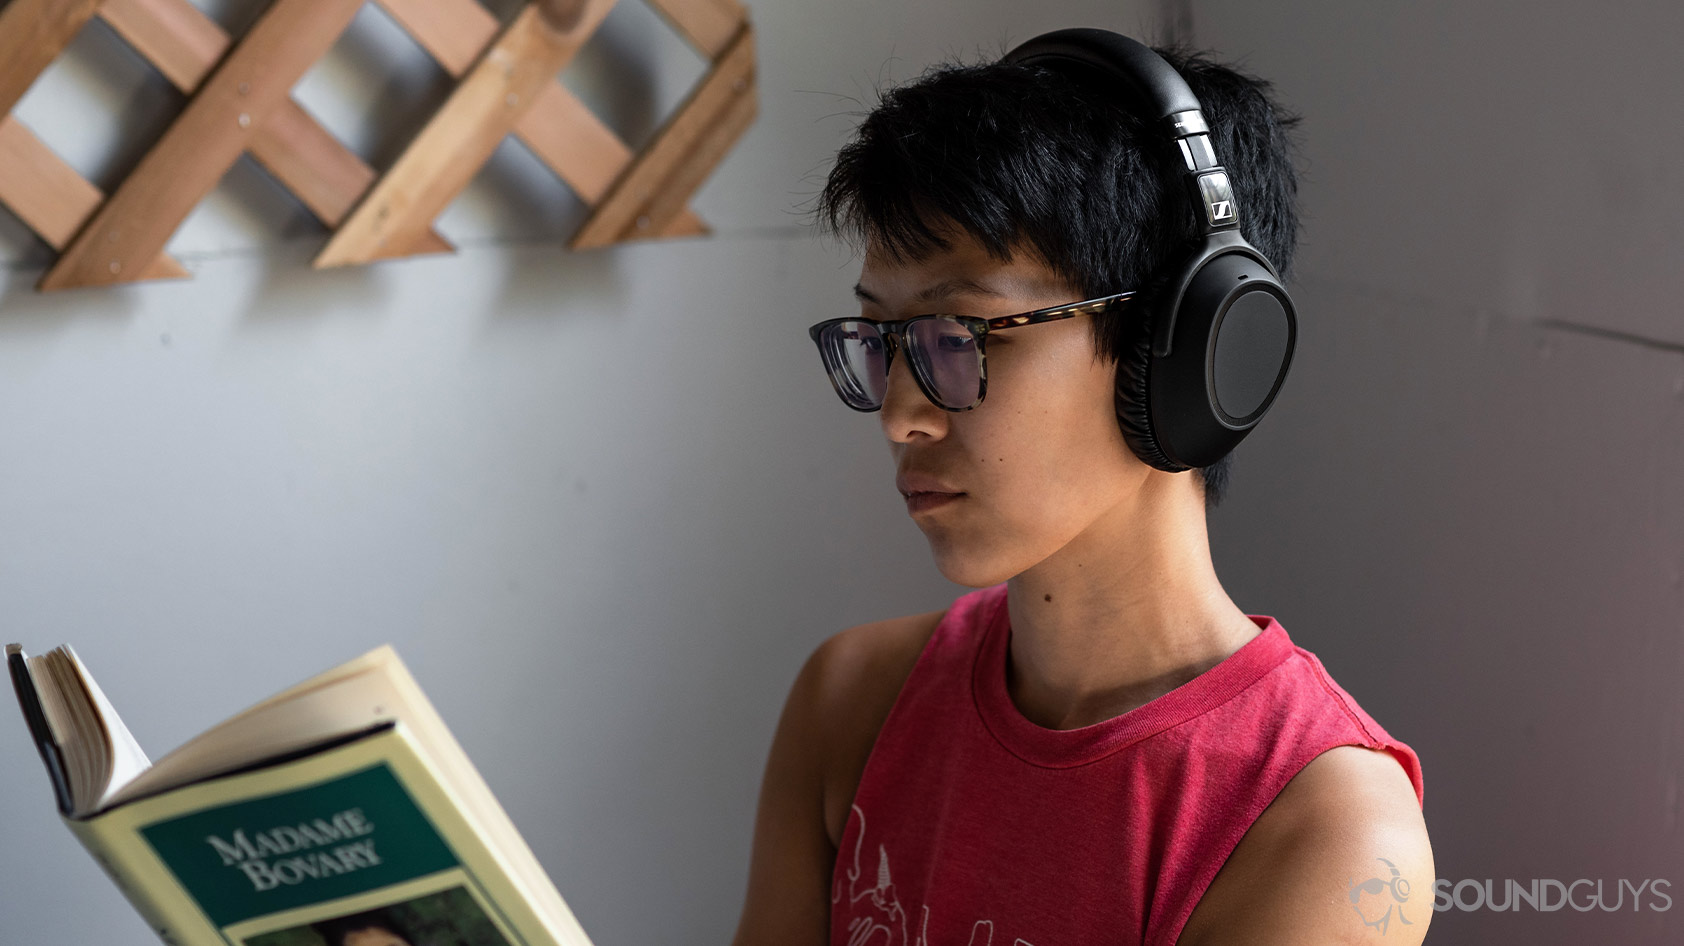 A picture of the Sennheiser PXC 550-II worn by a woman reading on a porch.